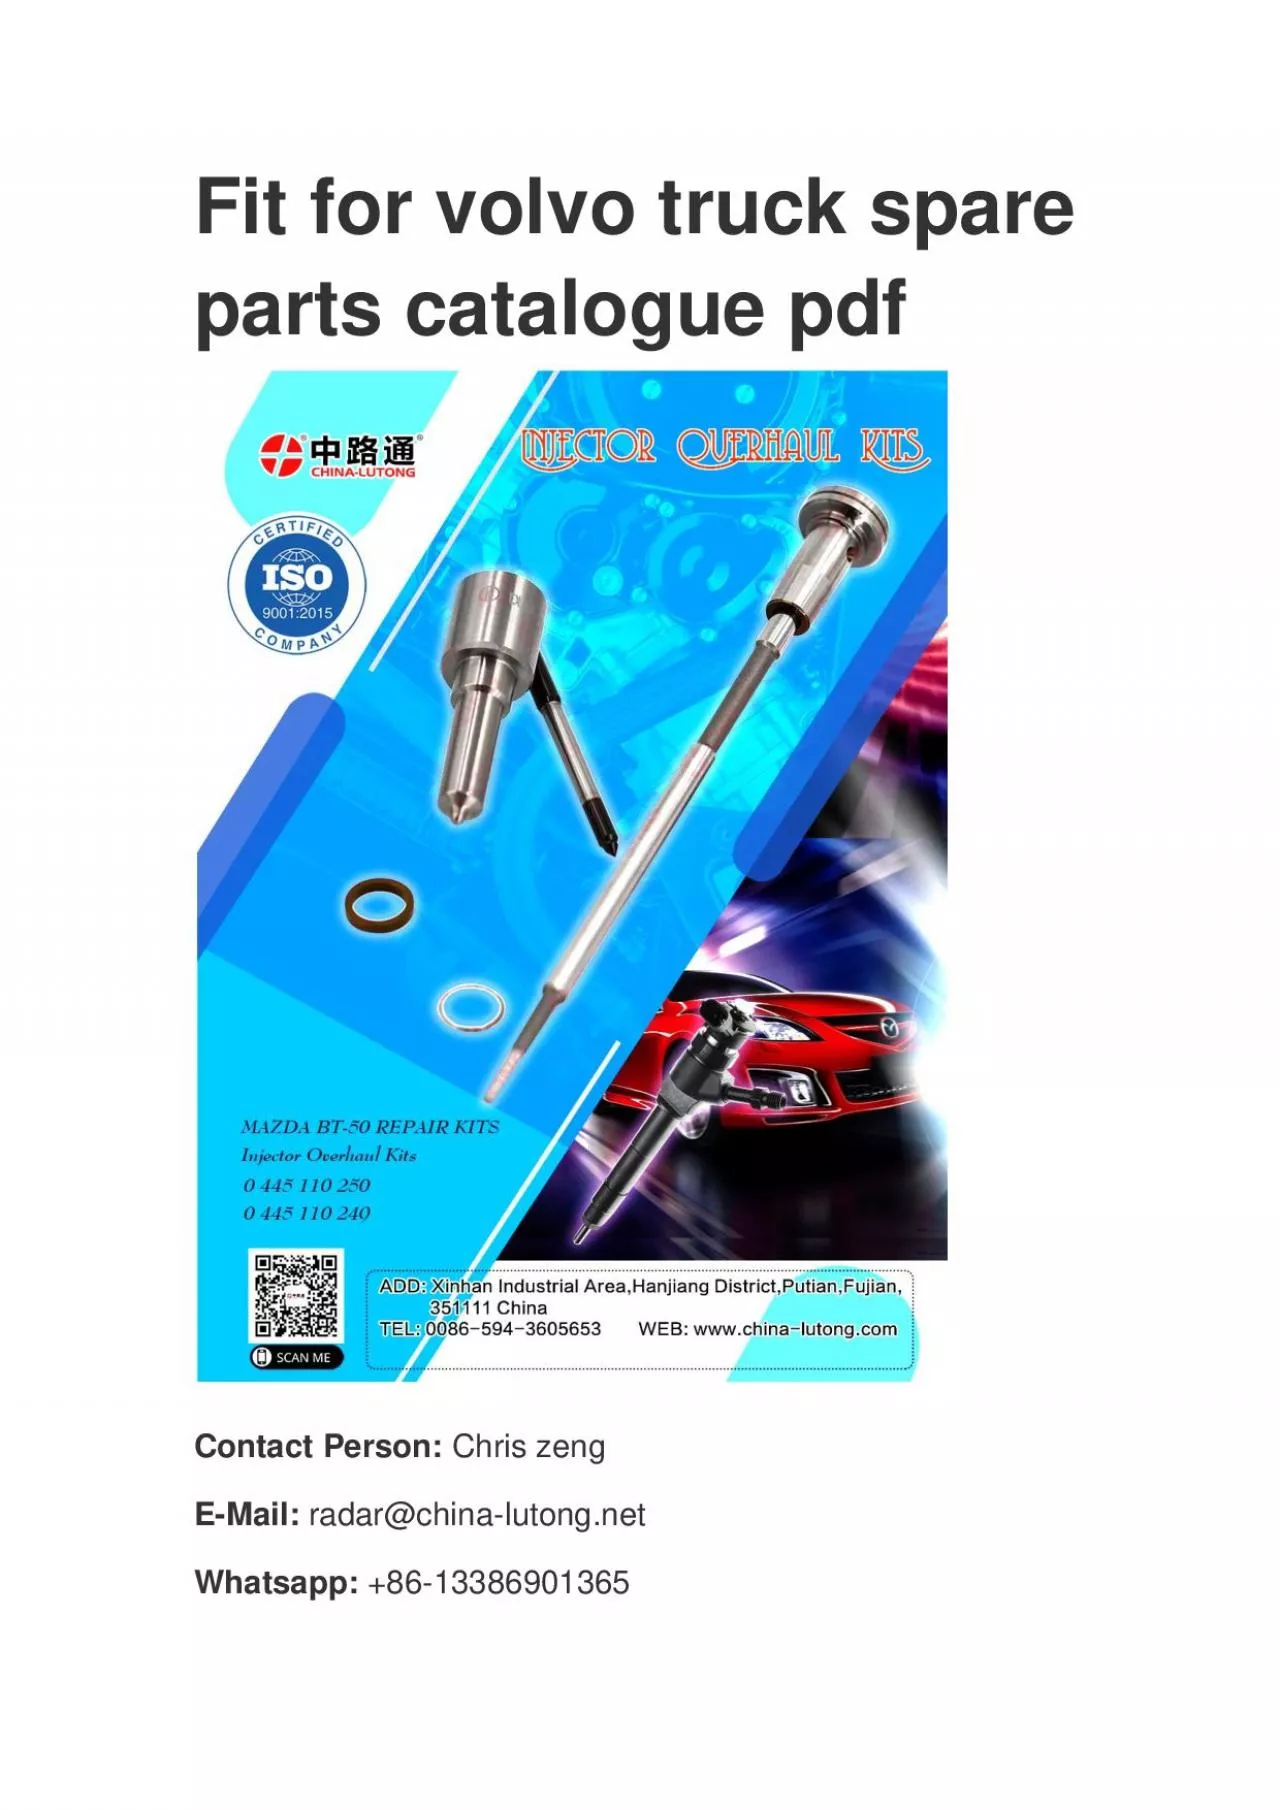 Fit for volvo truck spare parts catalogue pdf